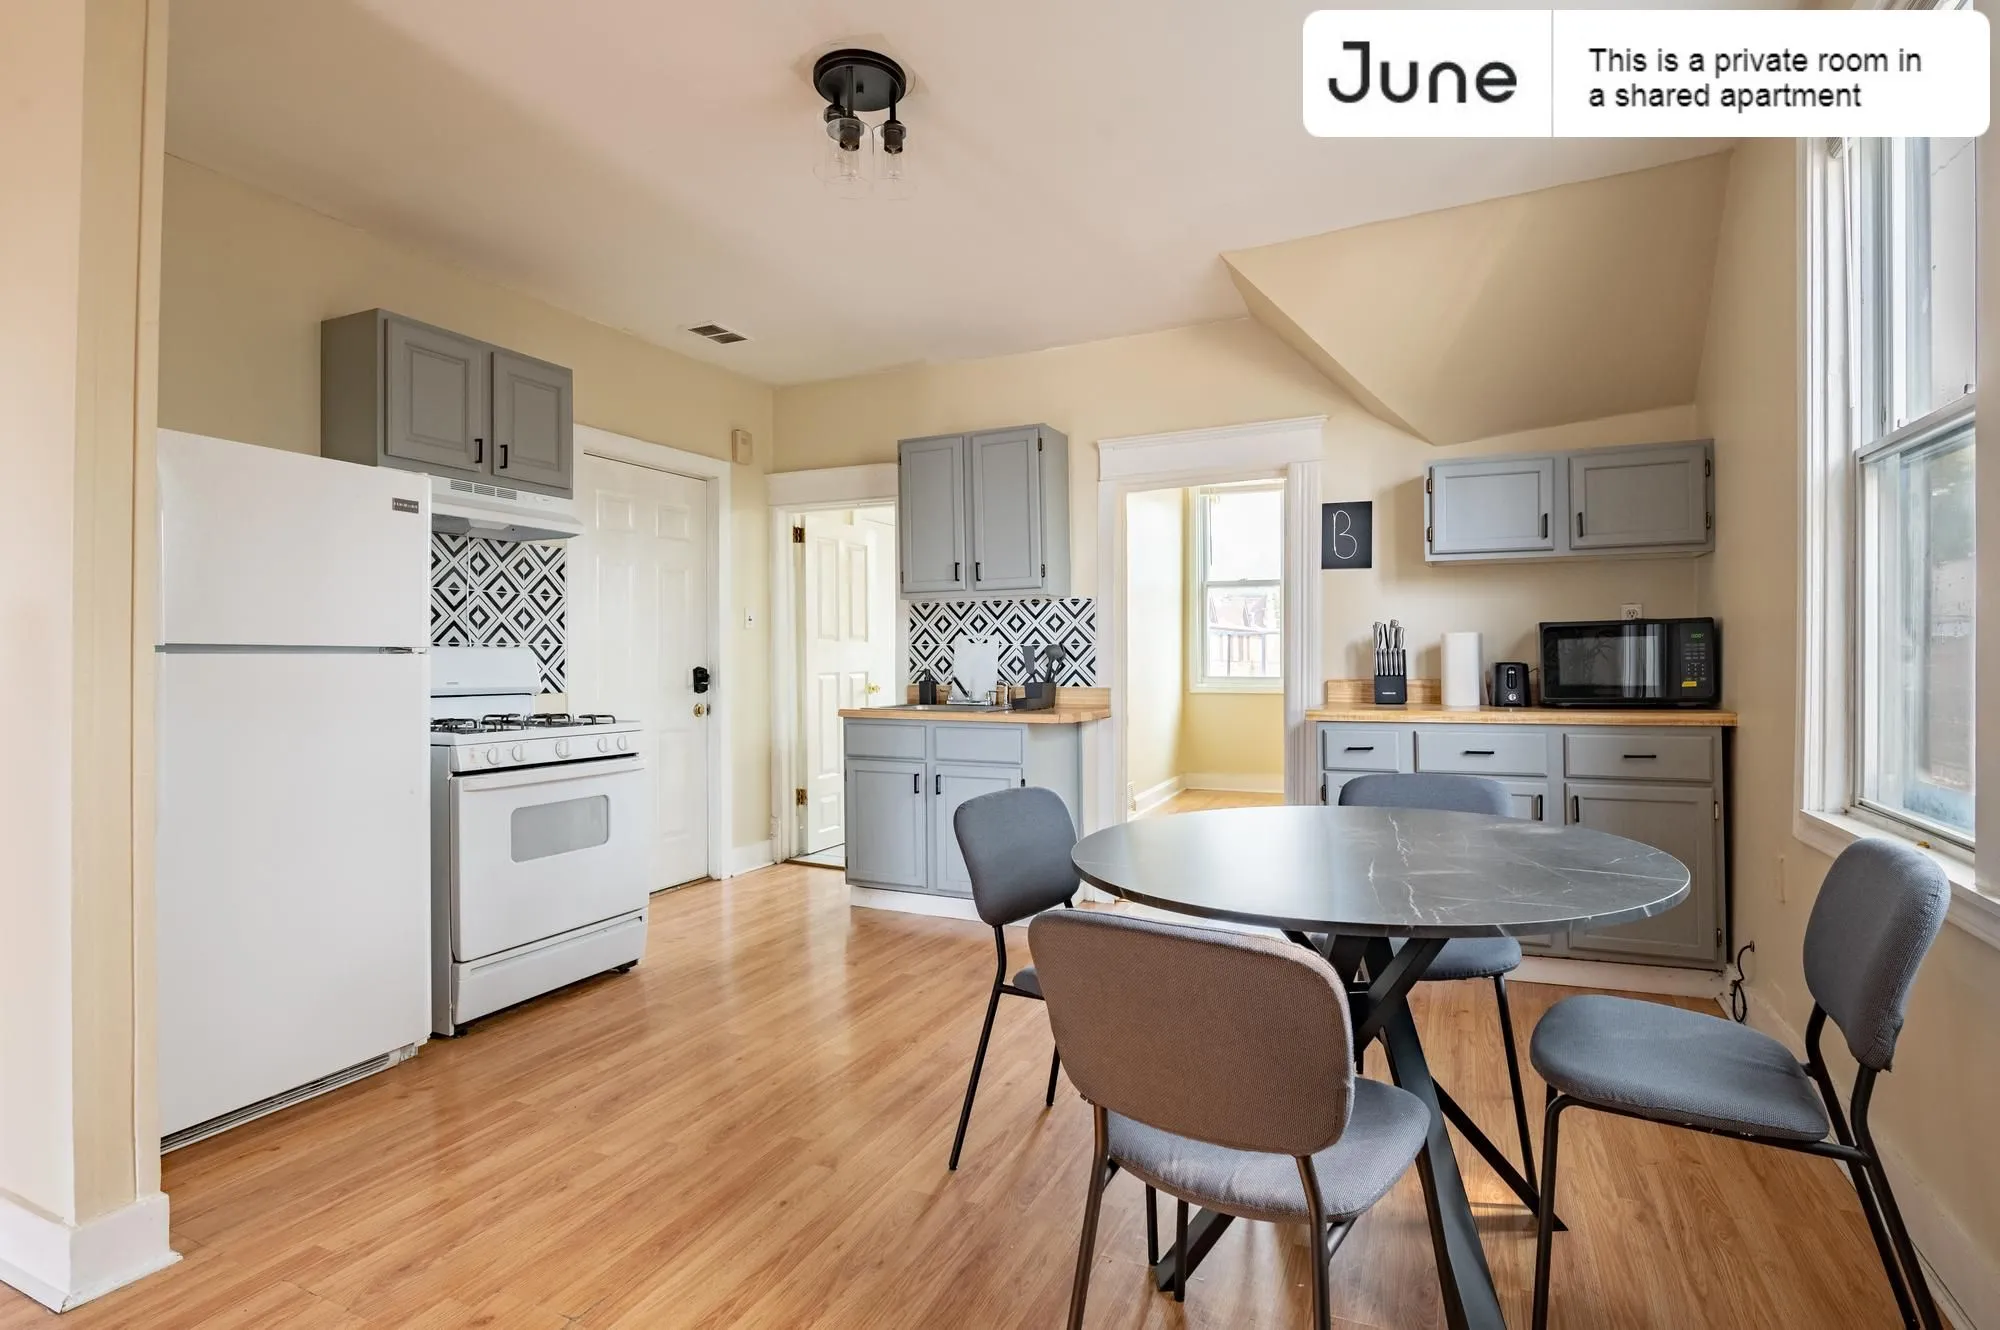 2619 N CALIFORNIA AVE 60647-Room For Rent-unit#003-Chicago-IL